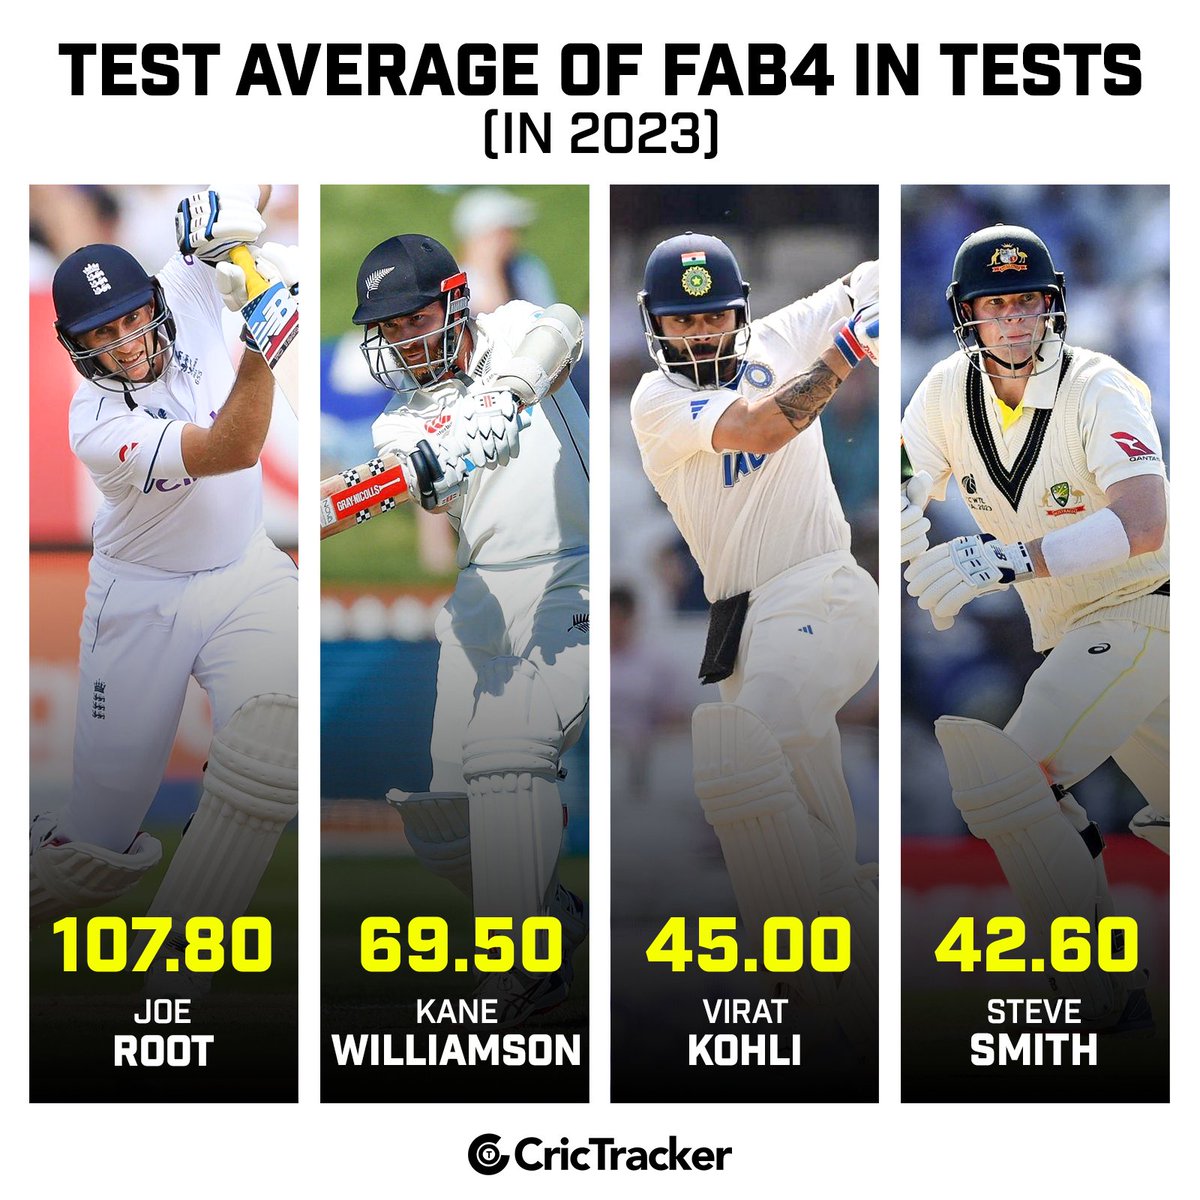 Joe Root is dominating the chart with the best average among the fab four in Test cricket thus far in 2023.

#JoeRoot #Fab4 #Test